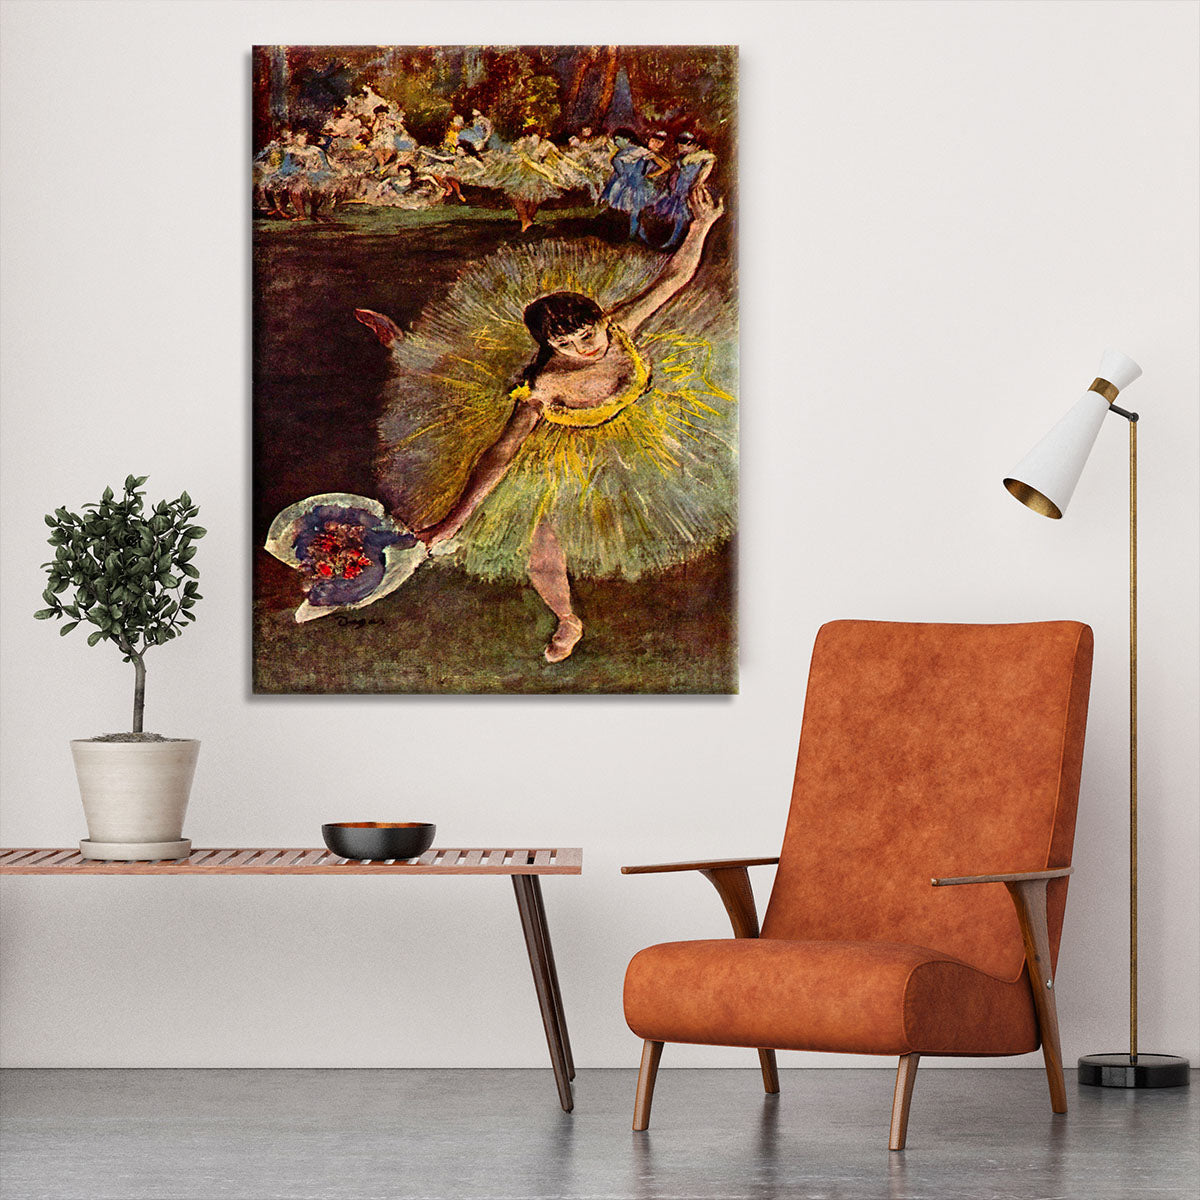 End of the arabesque by Degas Canvas Print or Poster - Canvas Art Rocks - 6